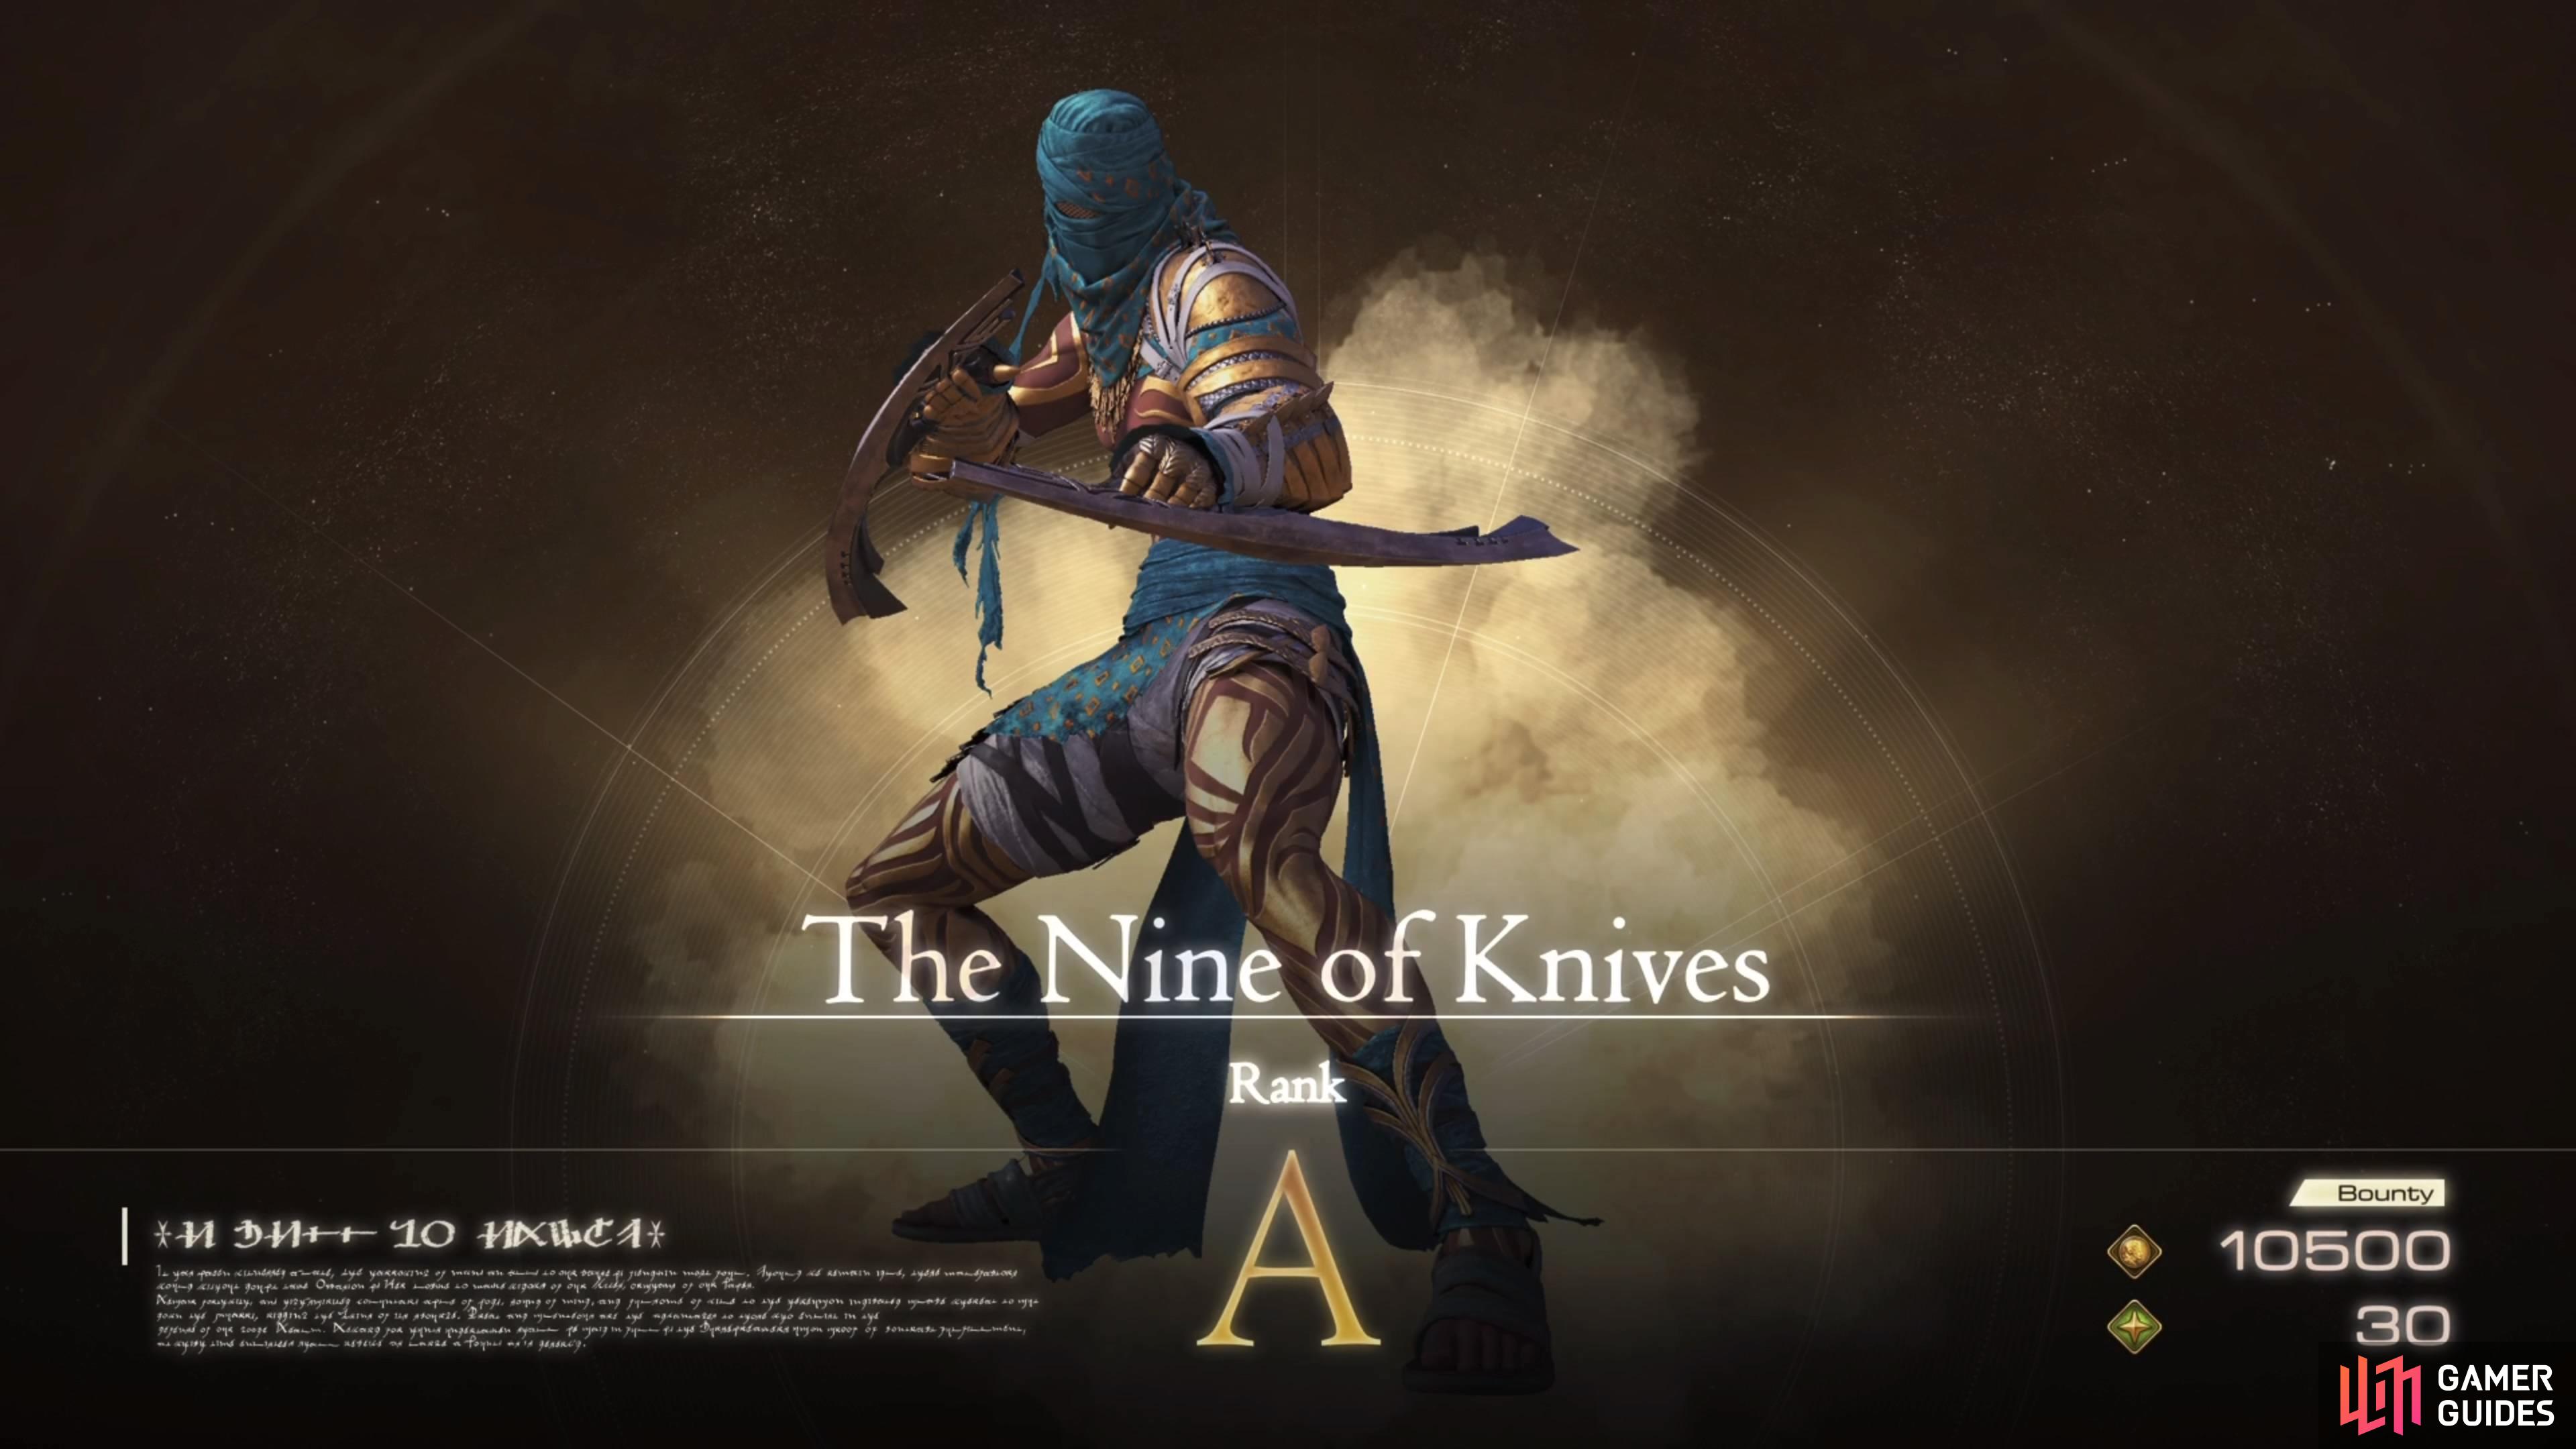 The Nine of Knives will be the second A-Rank hunt you encounter in the game.